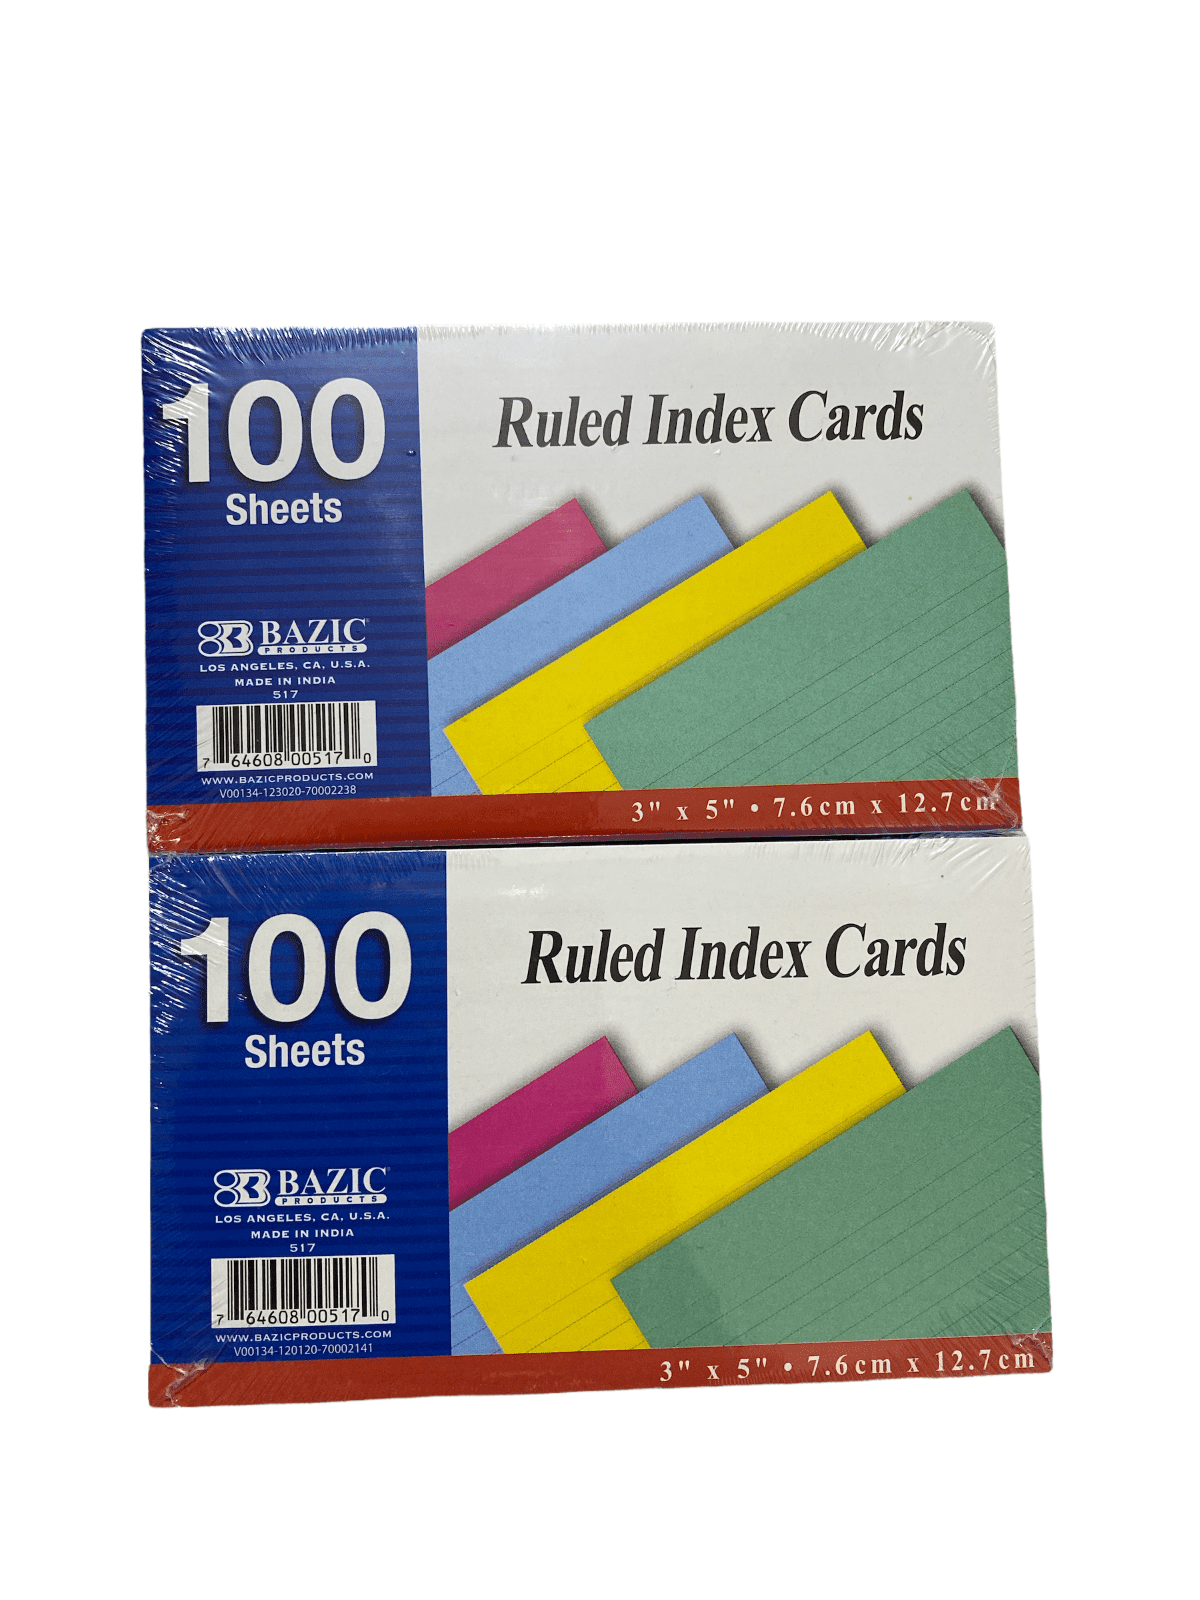 Ruled Index Flash Cards, Assorted Neon Colored, 3x5 Inch, 100-Count pk 2